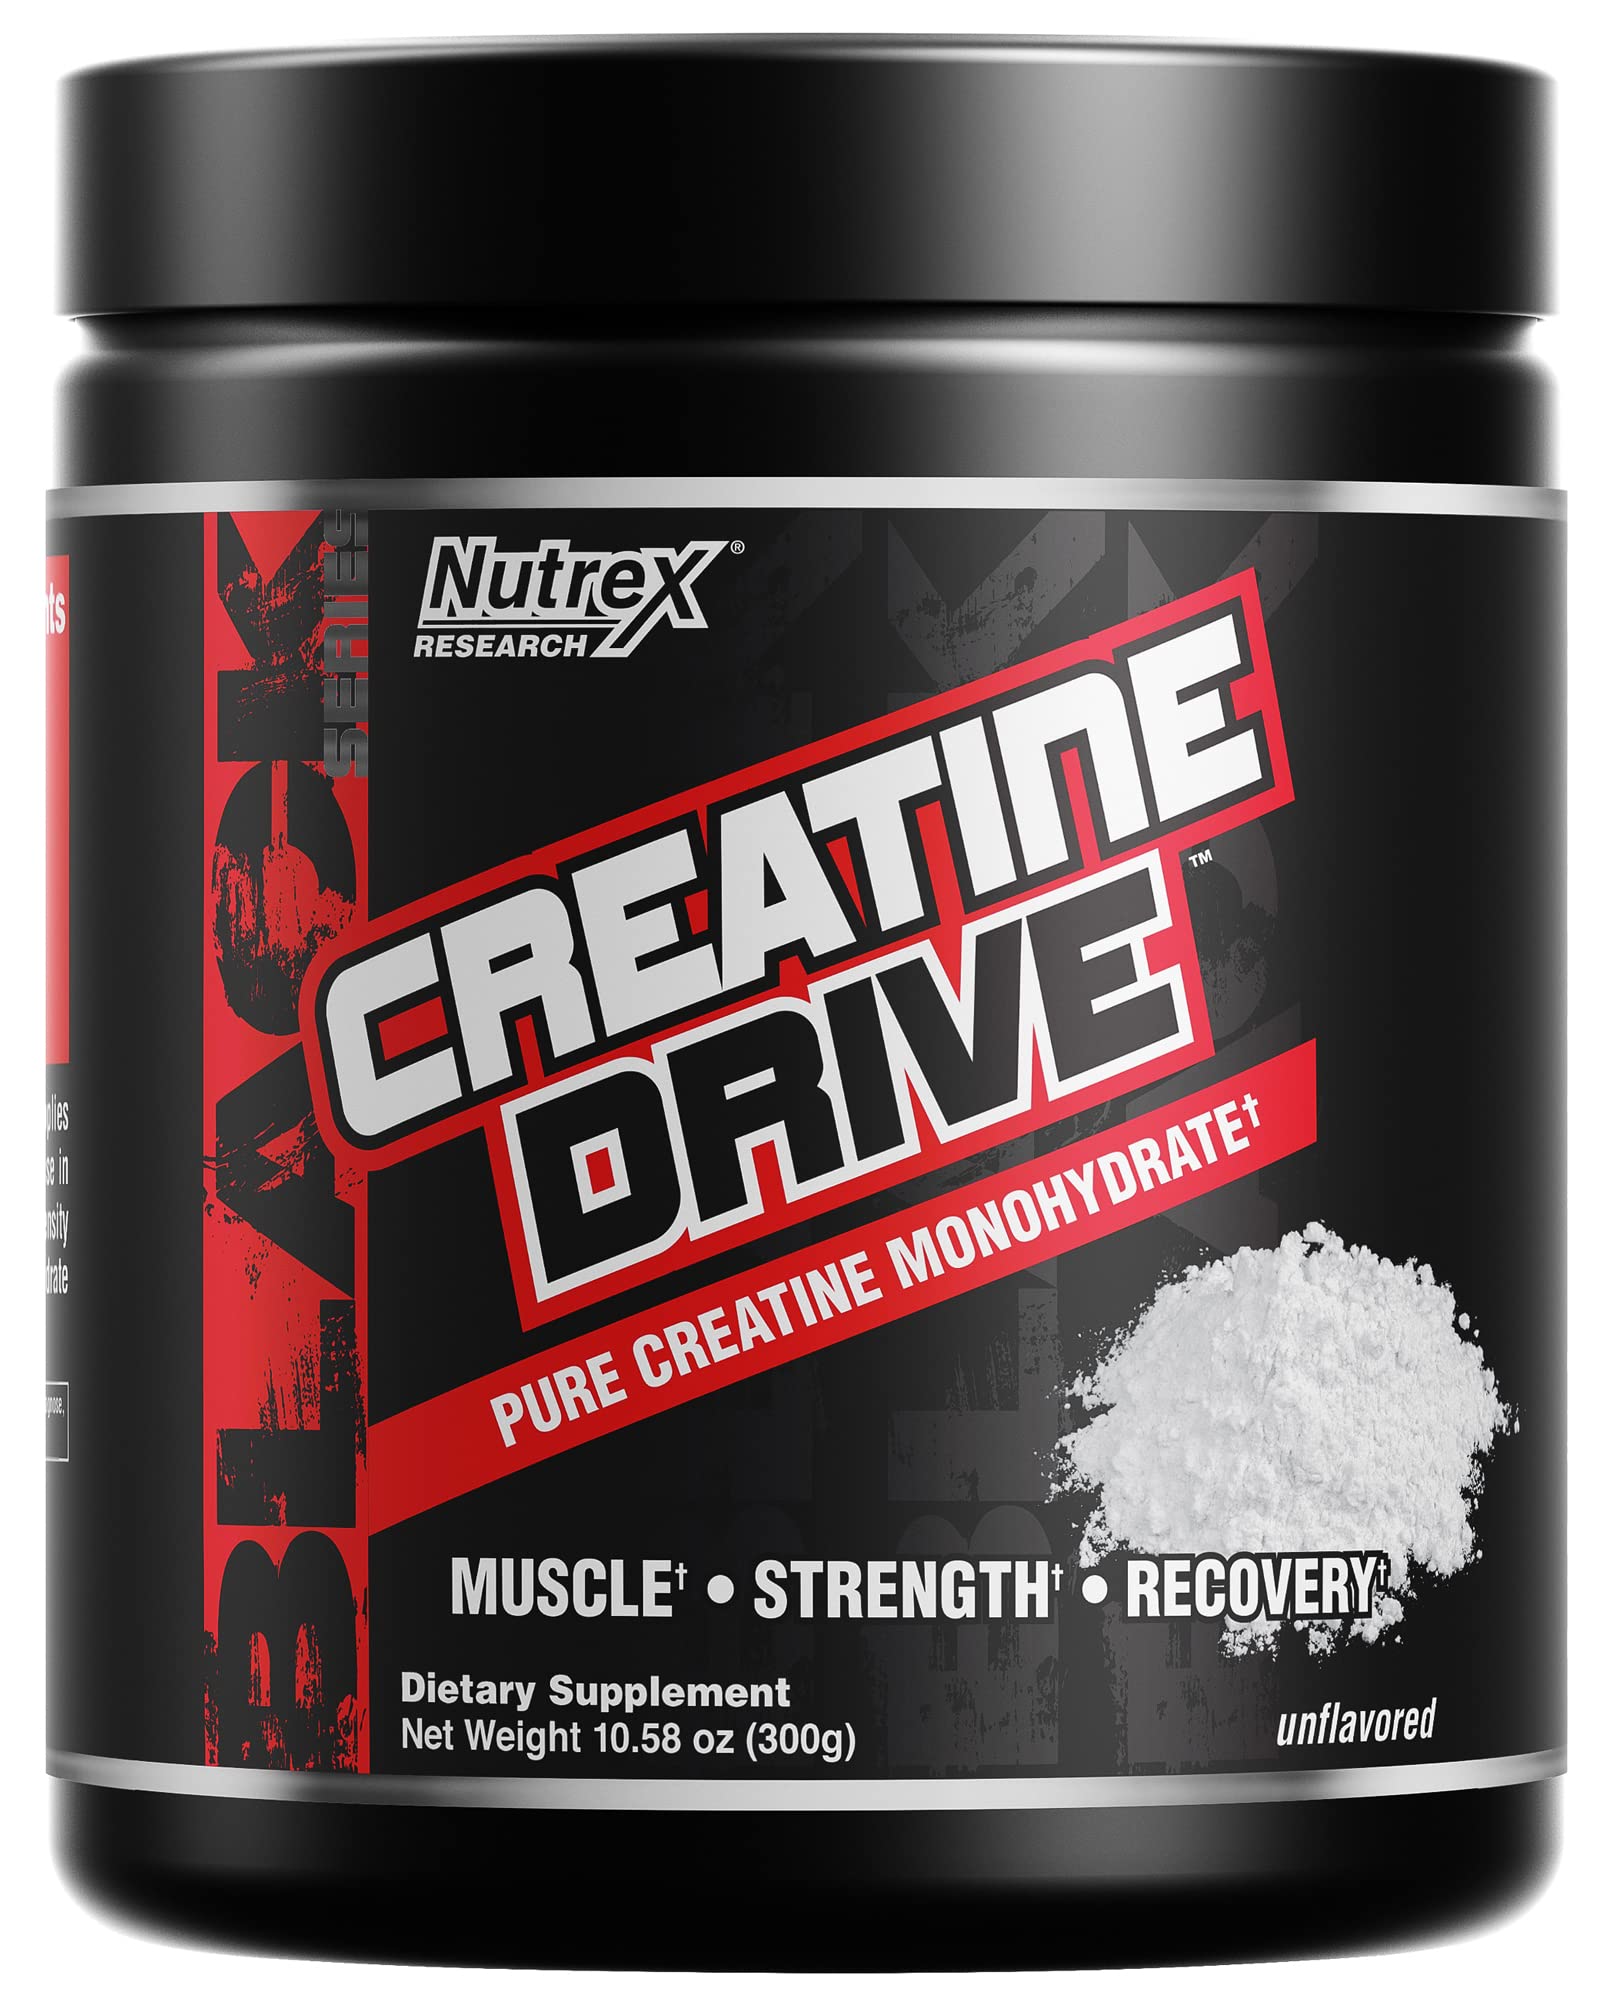 Nutrex Research Ultra Pure Creatine Monohydrate Powder Unflavored | 5G Creatine Powder for Muscle Gain, Strength, Endurance and Recovery | 60 Servings